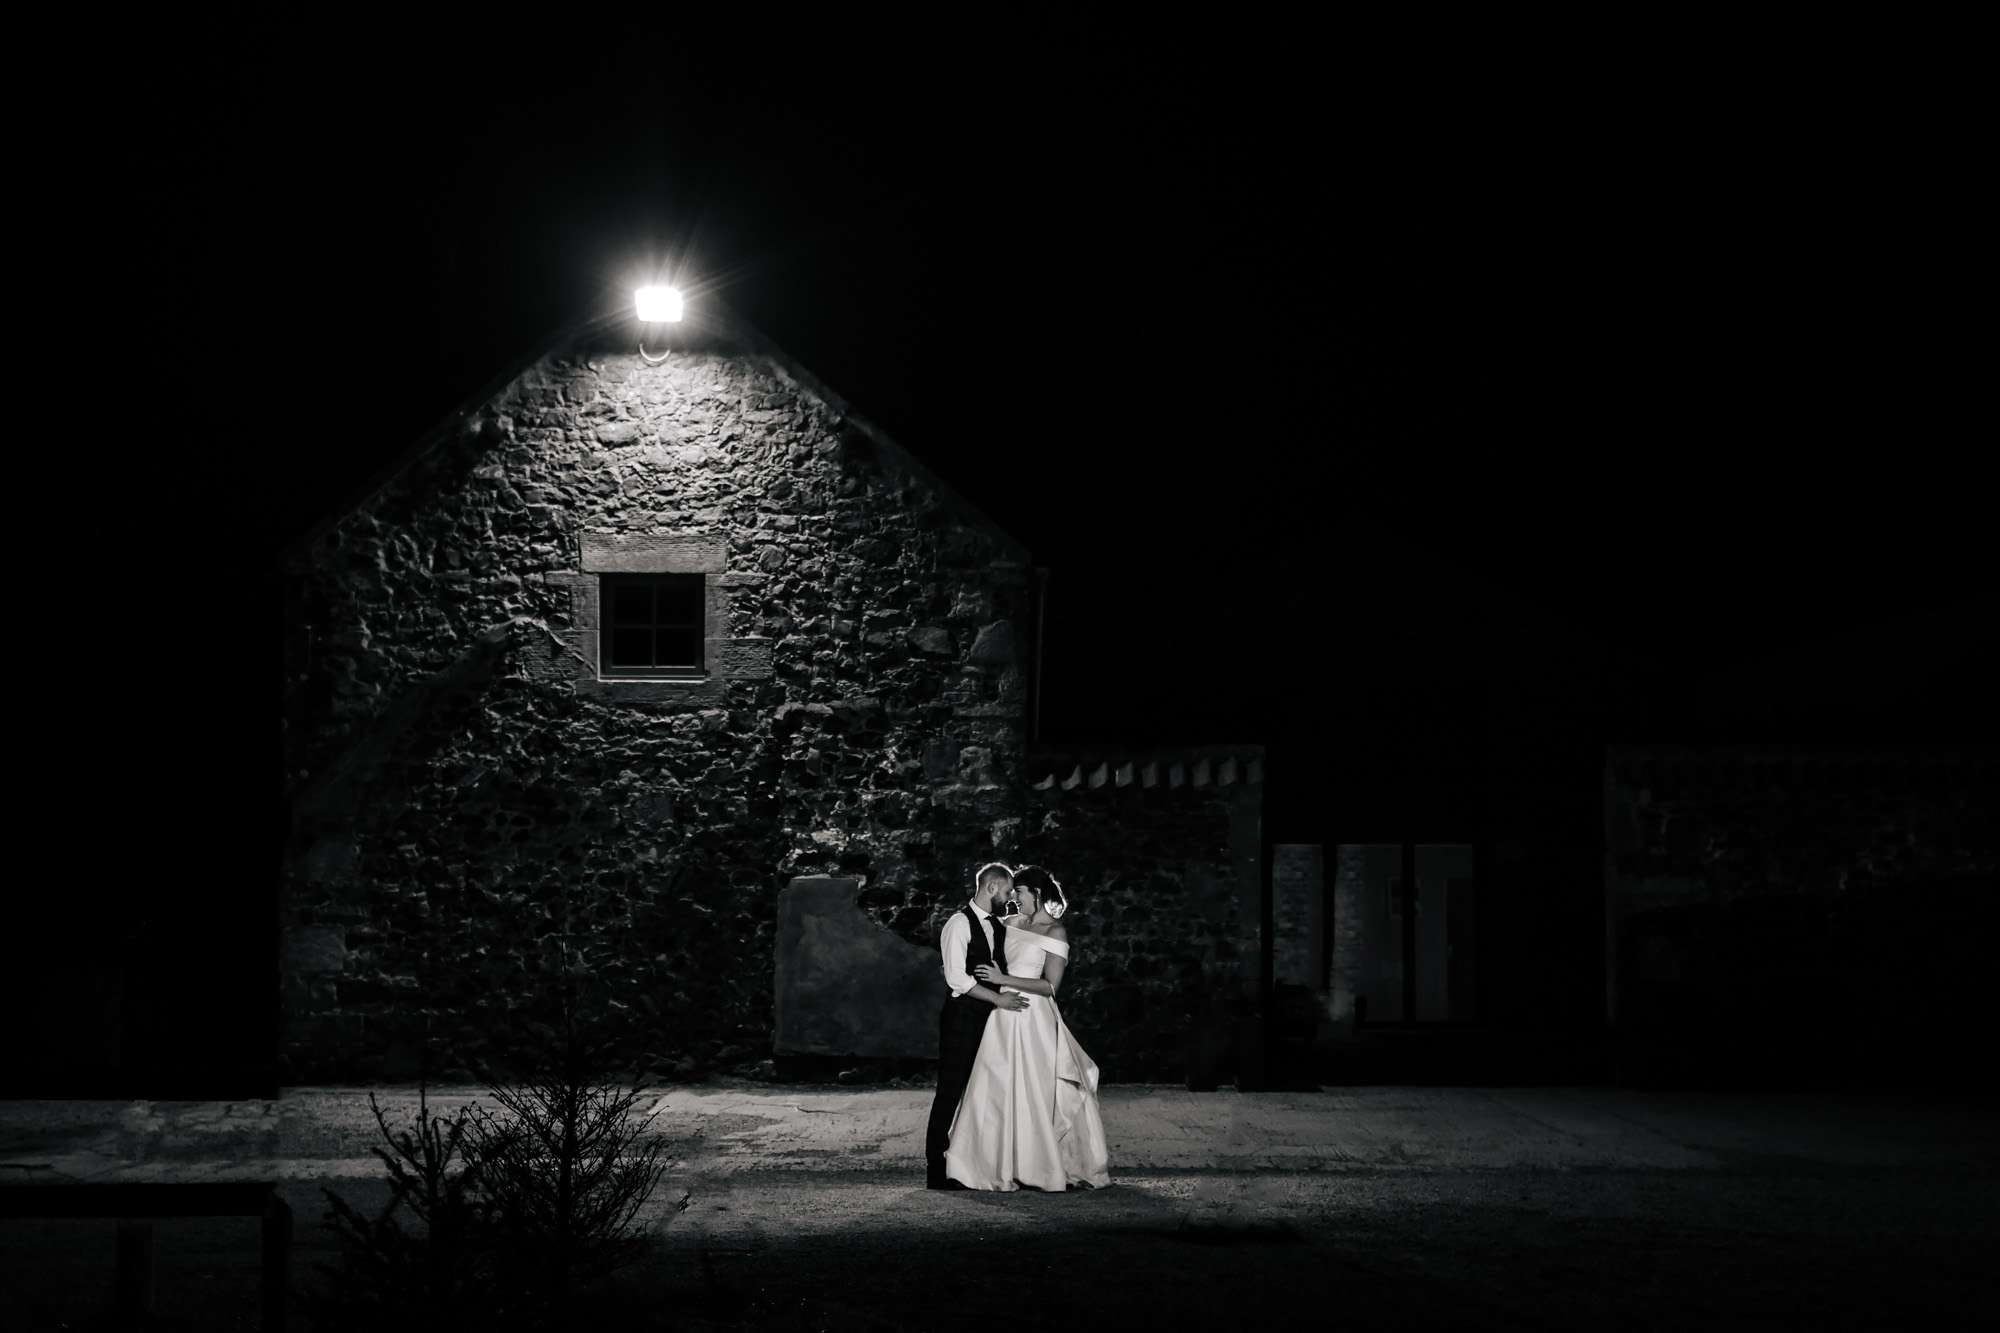 Bride and Groom in night portrait at a wedding